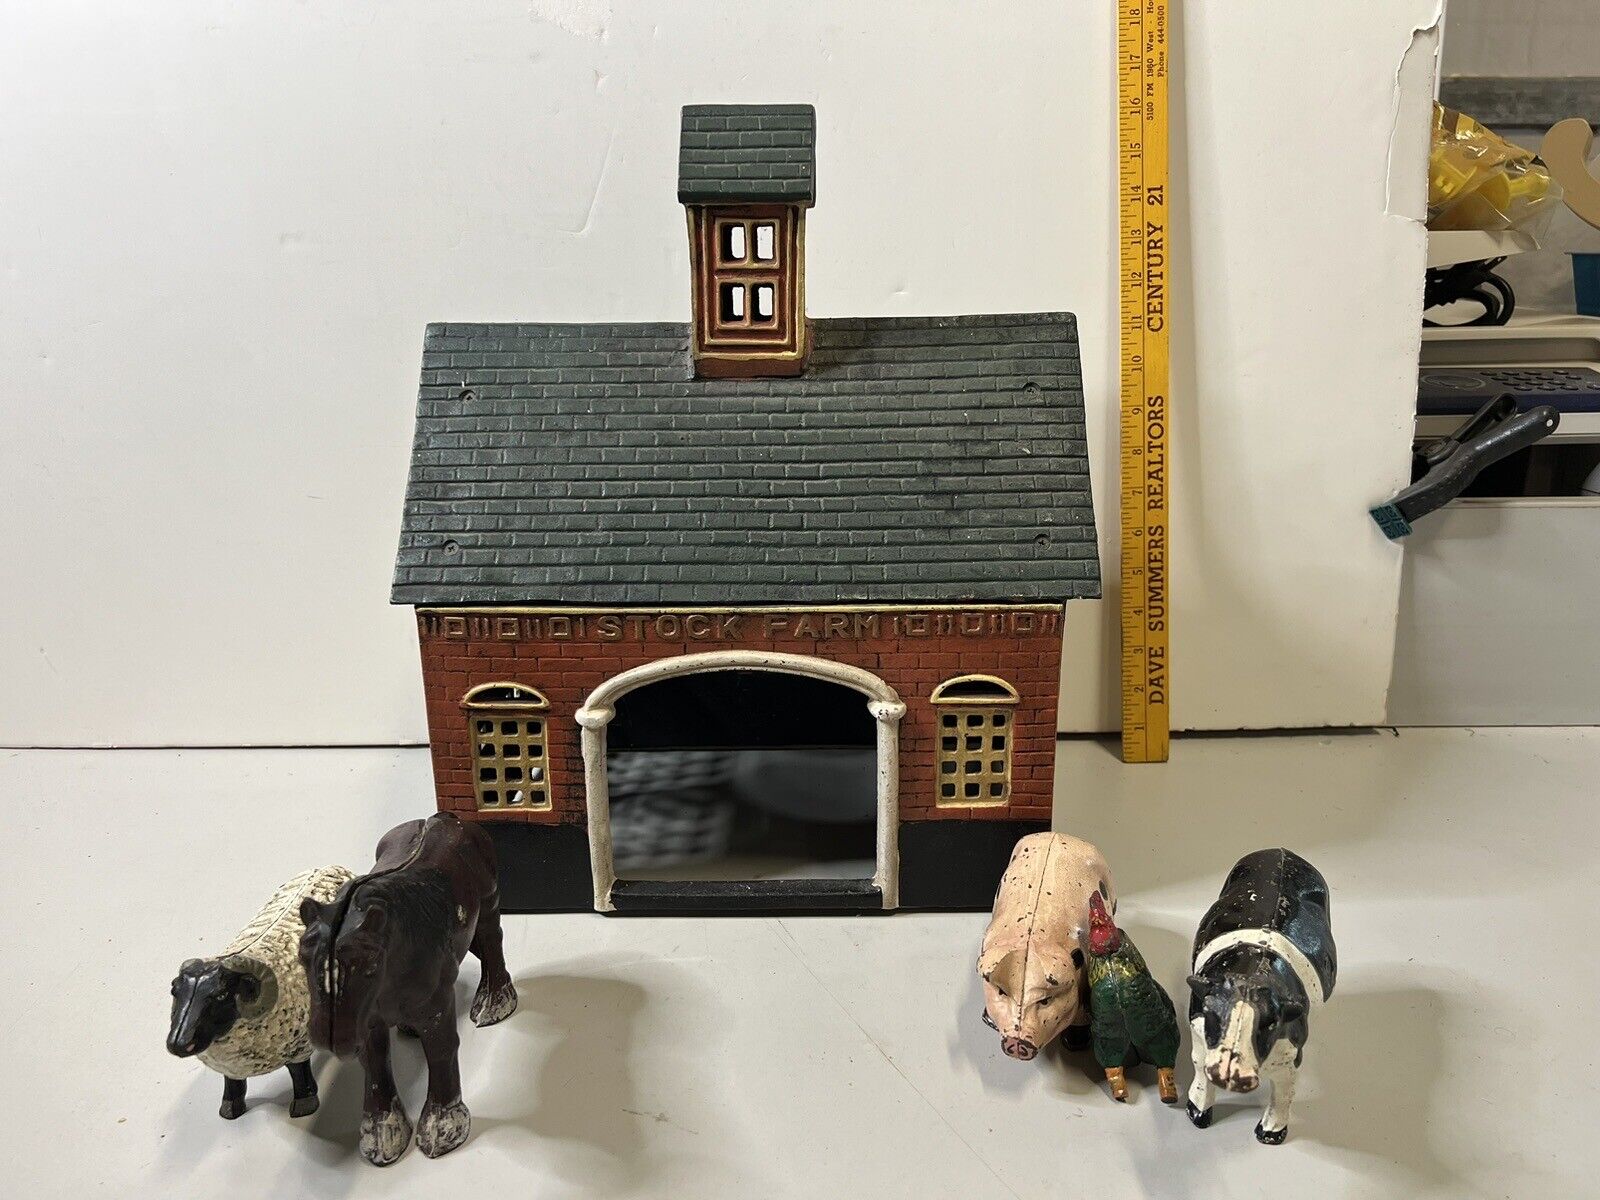 OLD STOCK FARM Cast Iron Barn w/Animals - Horse Sheep Pig Chicken Cow